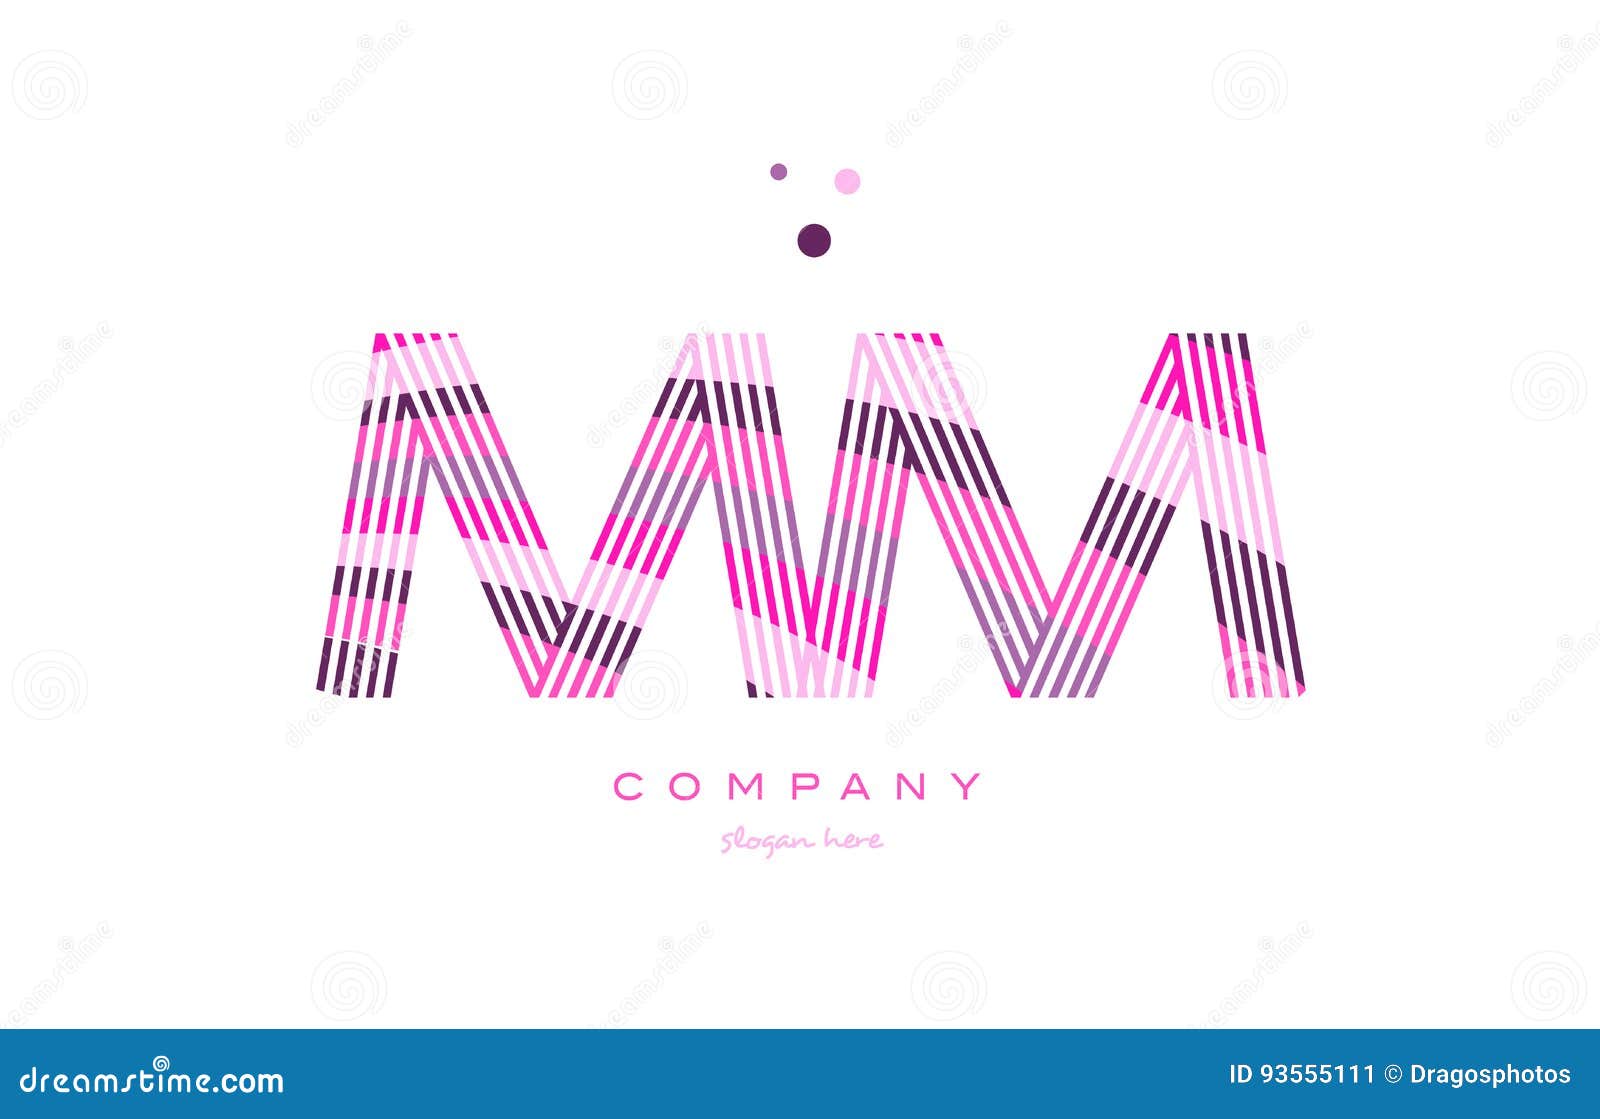 Mm initial logo with colorful circle template Vector Image